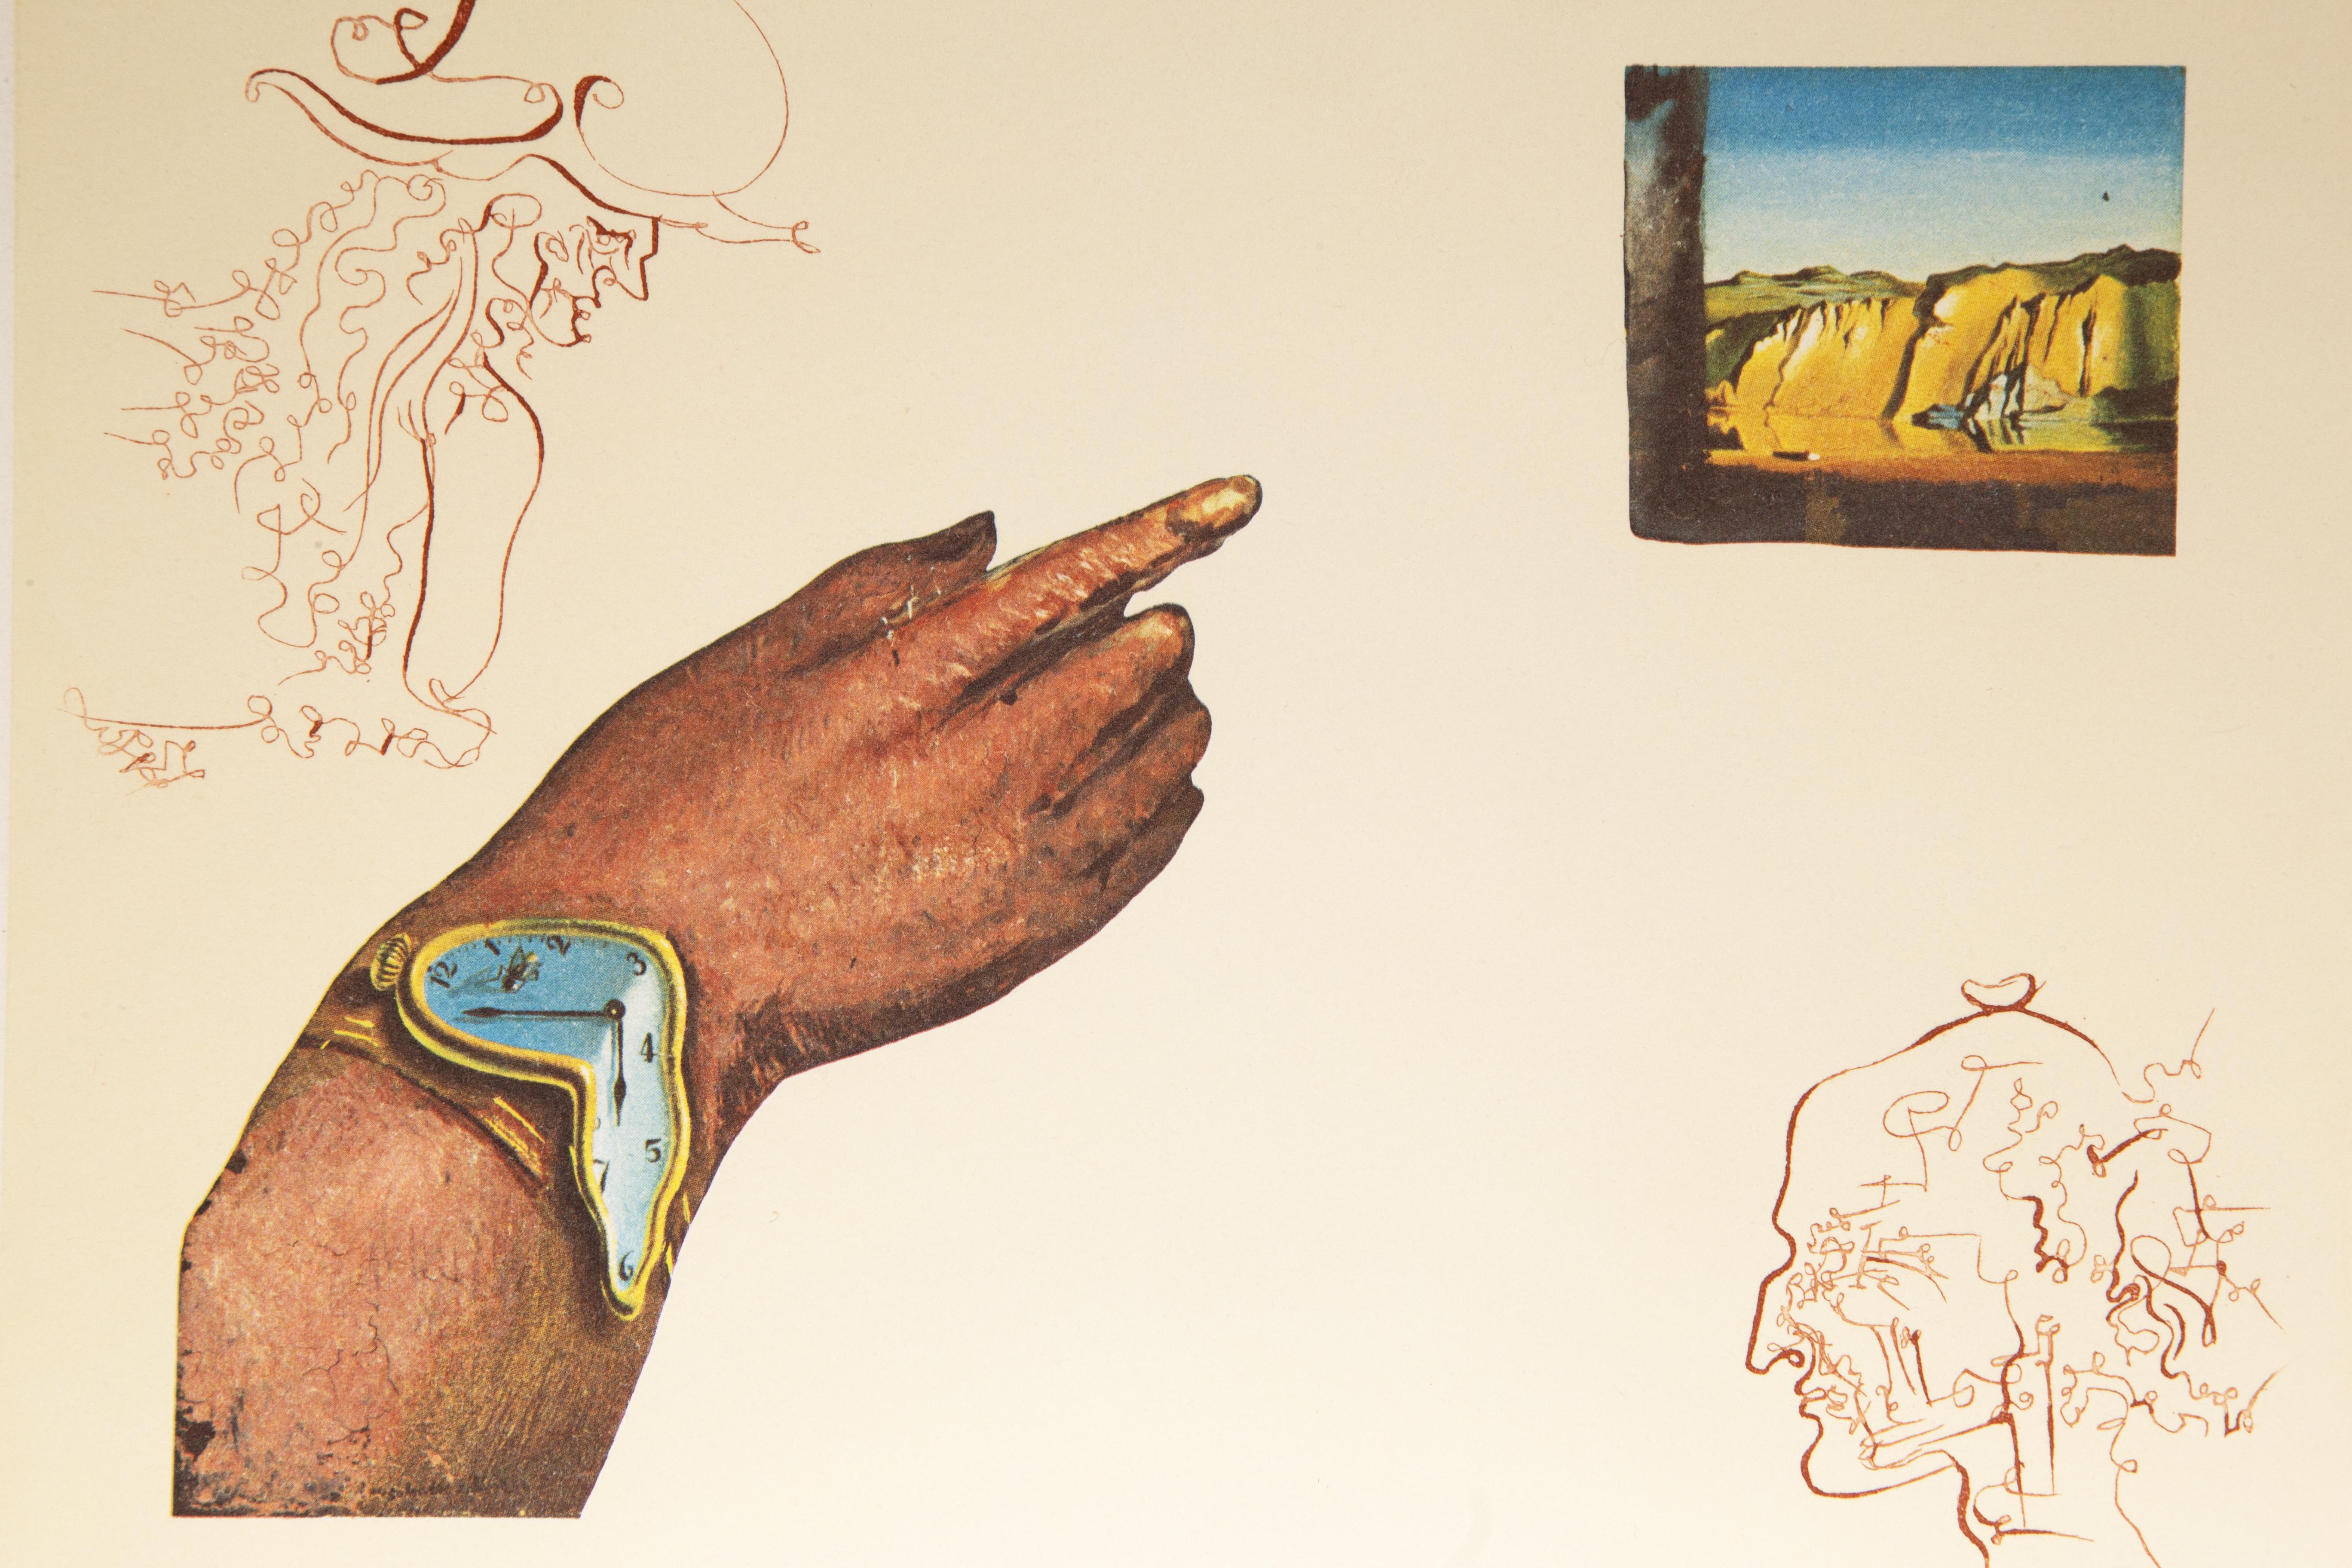 Reflection from the Cycles of Life, Lithograph and Etching by Salvador Dali - Print by Salvador Dalí